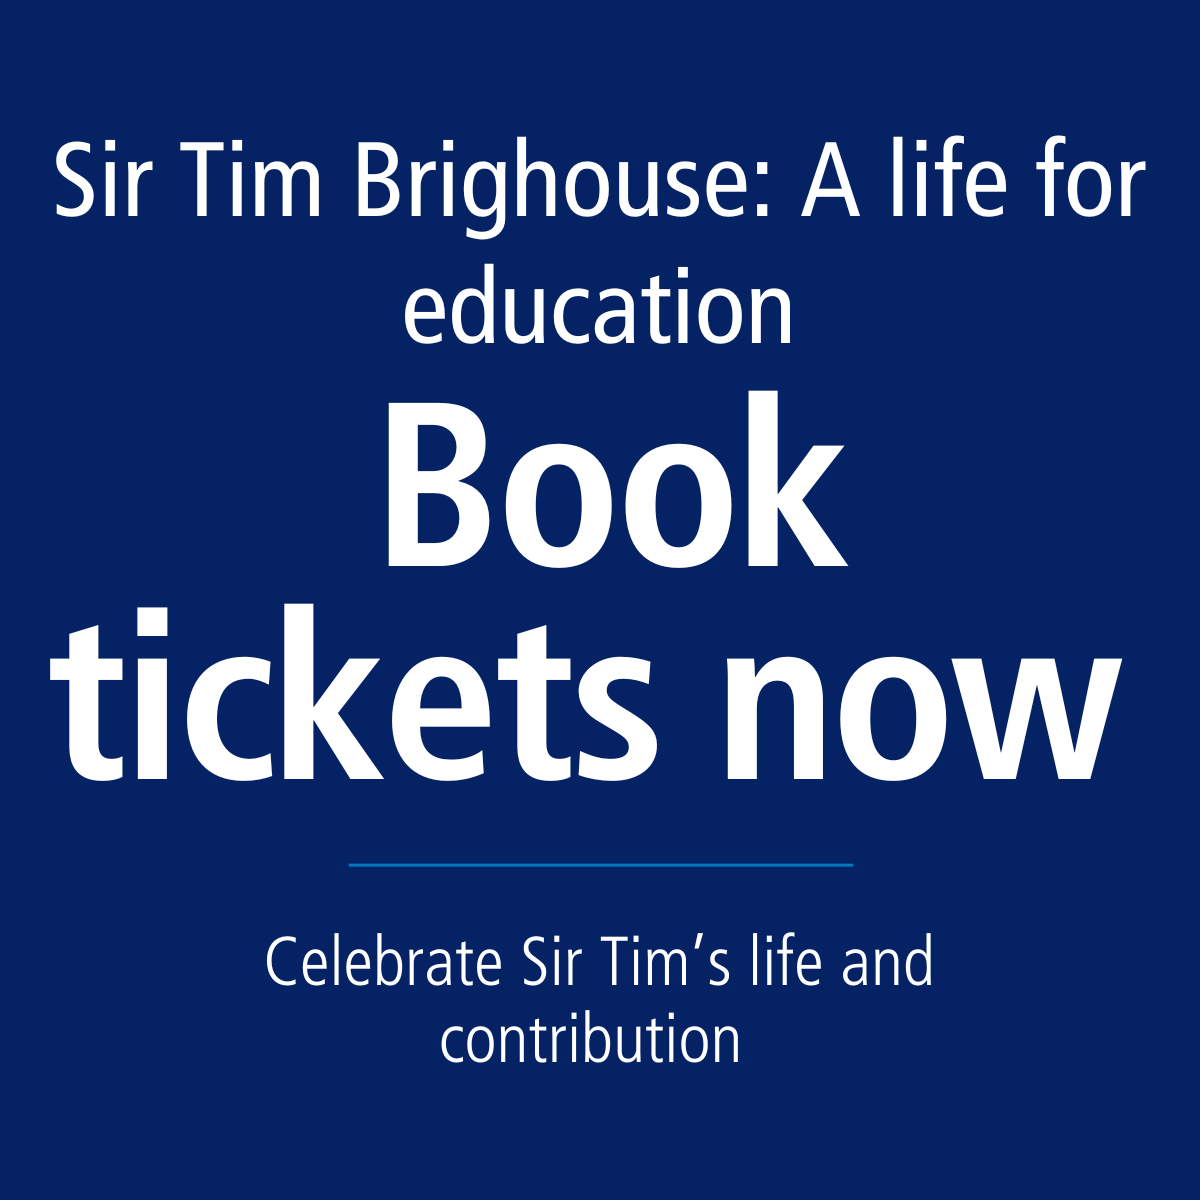 Please share widely You can now book tickets for the celebration of the life of Tim Brighouse. ticketsource.co.uk/a-life-for-edu…